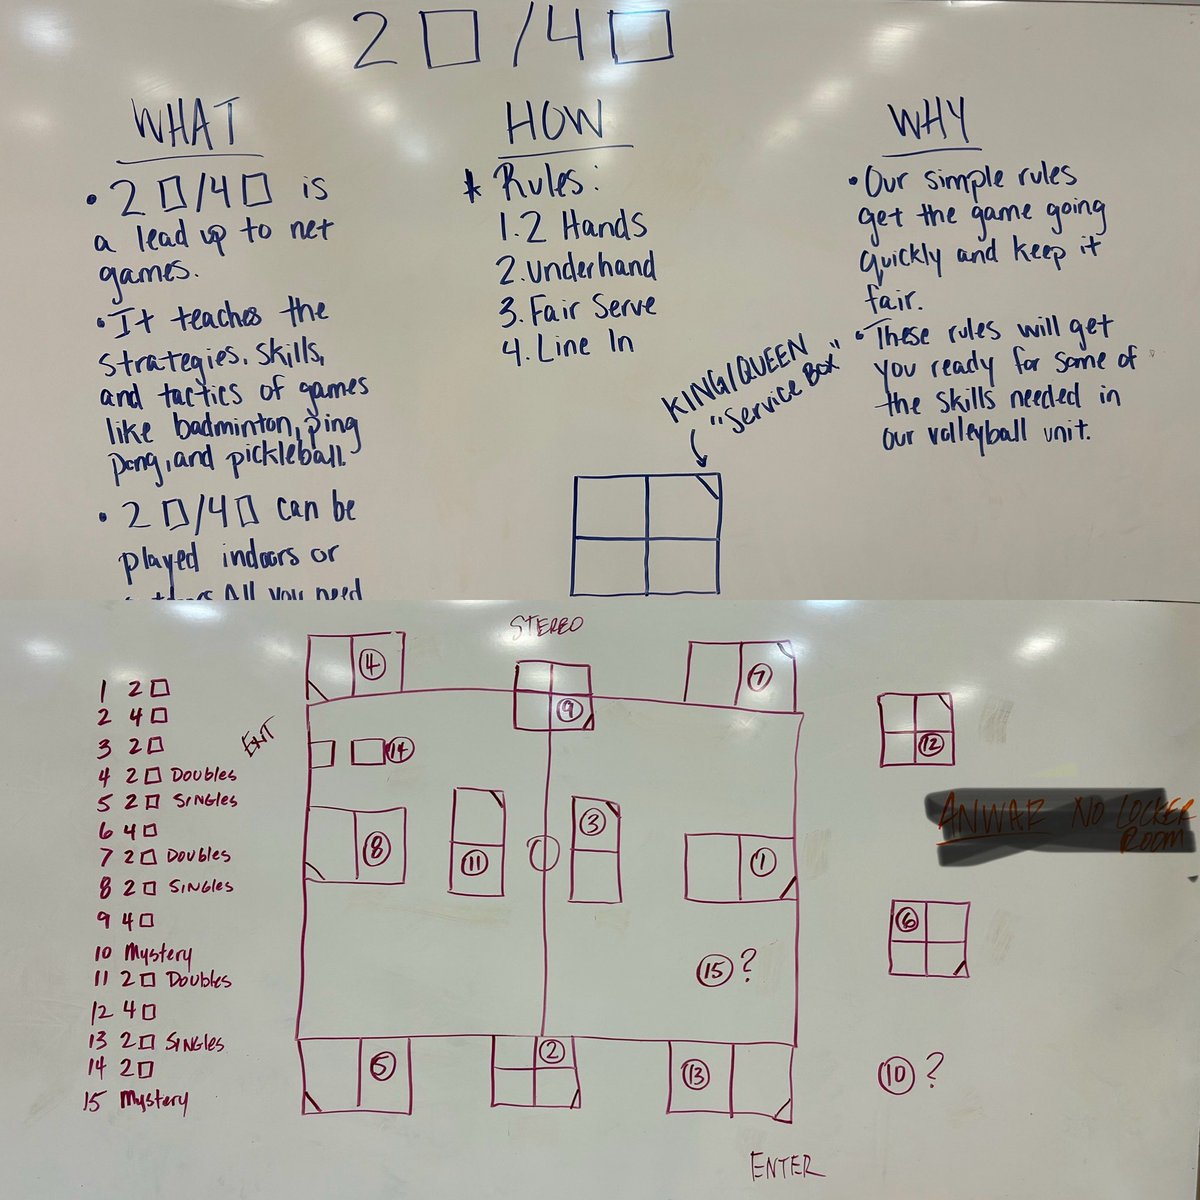 Probably my favorite unit of all time! 2 square and 4 square! #netgames #worksinMSPEtoo
#physed #iteachpe #makethebestofeveryday
#allkidslovetoplay 
#pe #getactive #letsmove #physicaleducation #gym #school #weareallkids #playmore